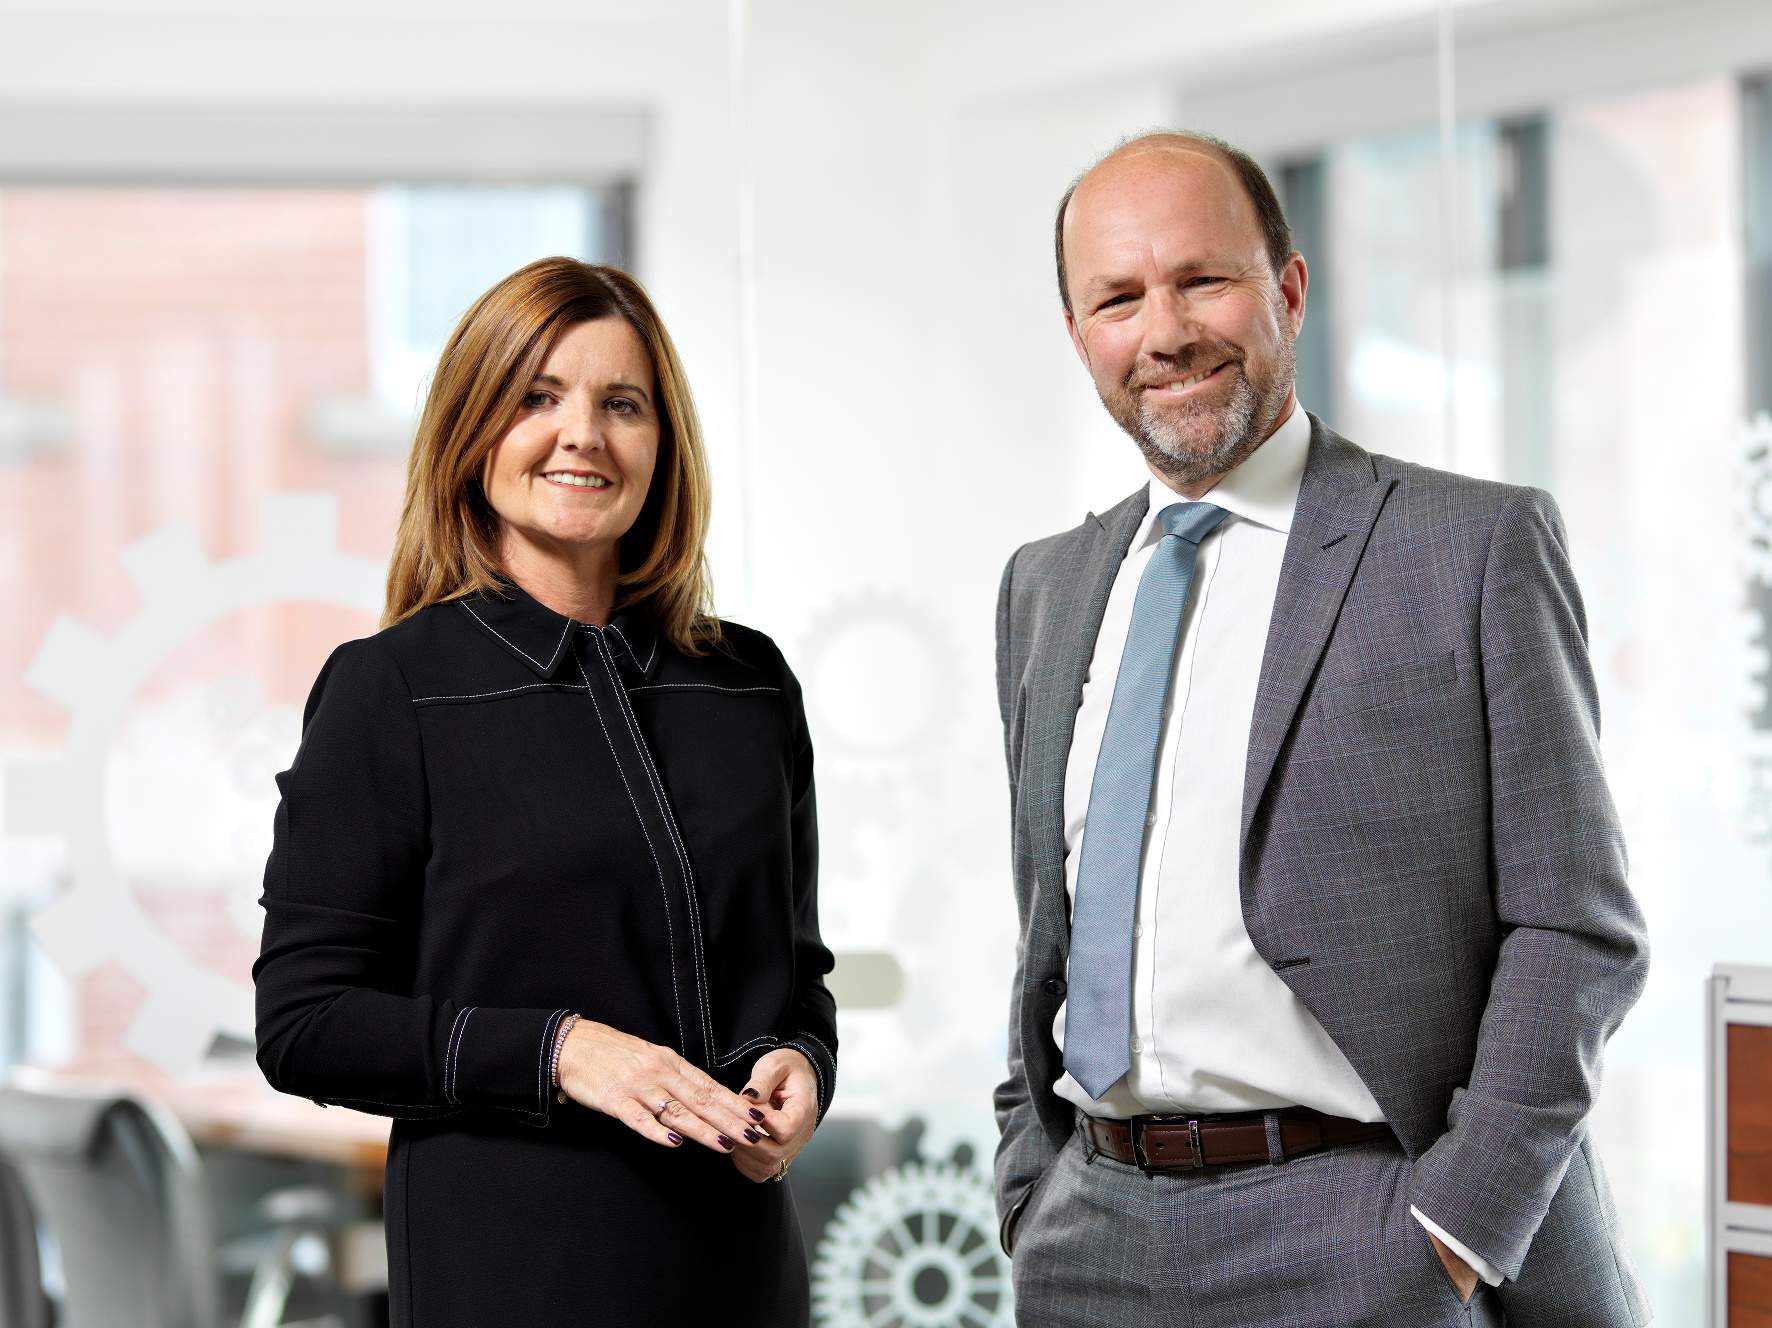 Reward appoints senior roles in Manchester office